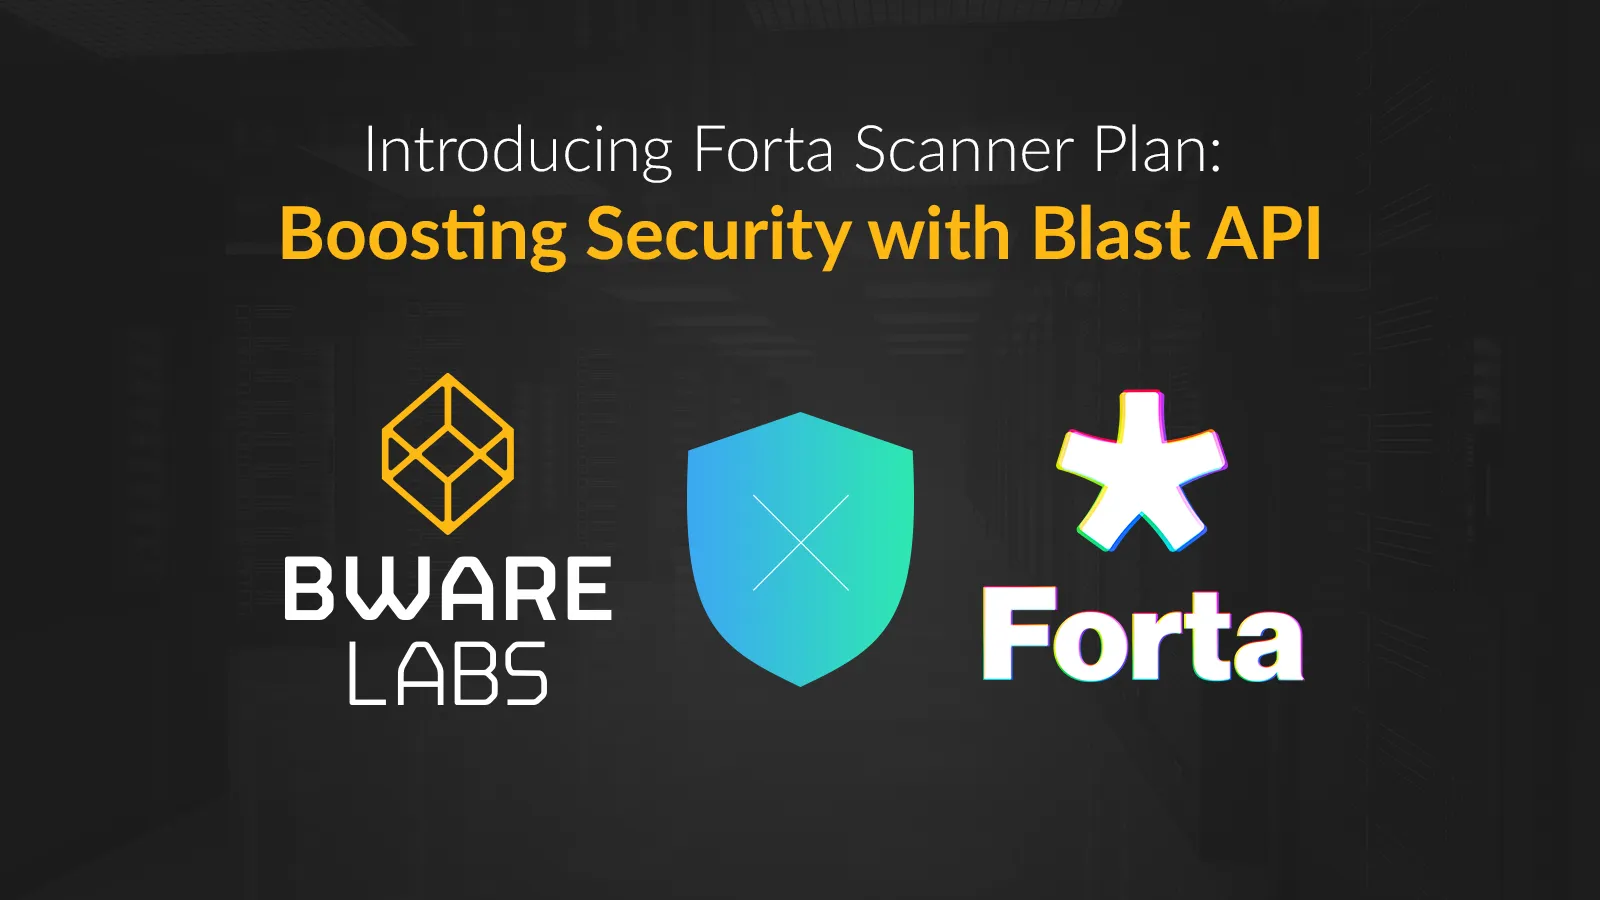 Introducing Forta Scanner Plan: Boosting Security with Blast API